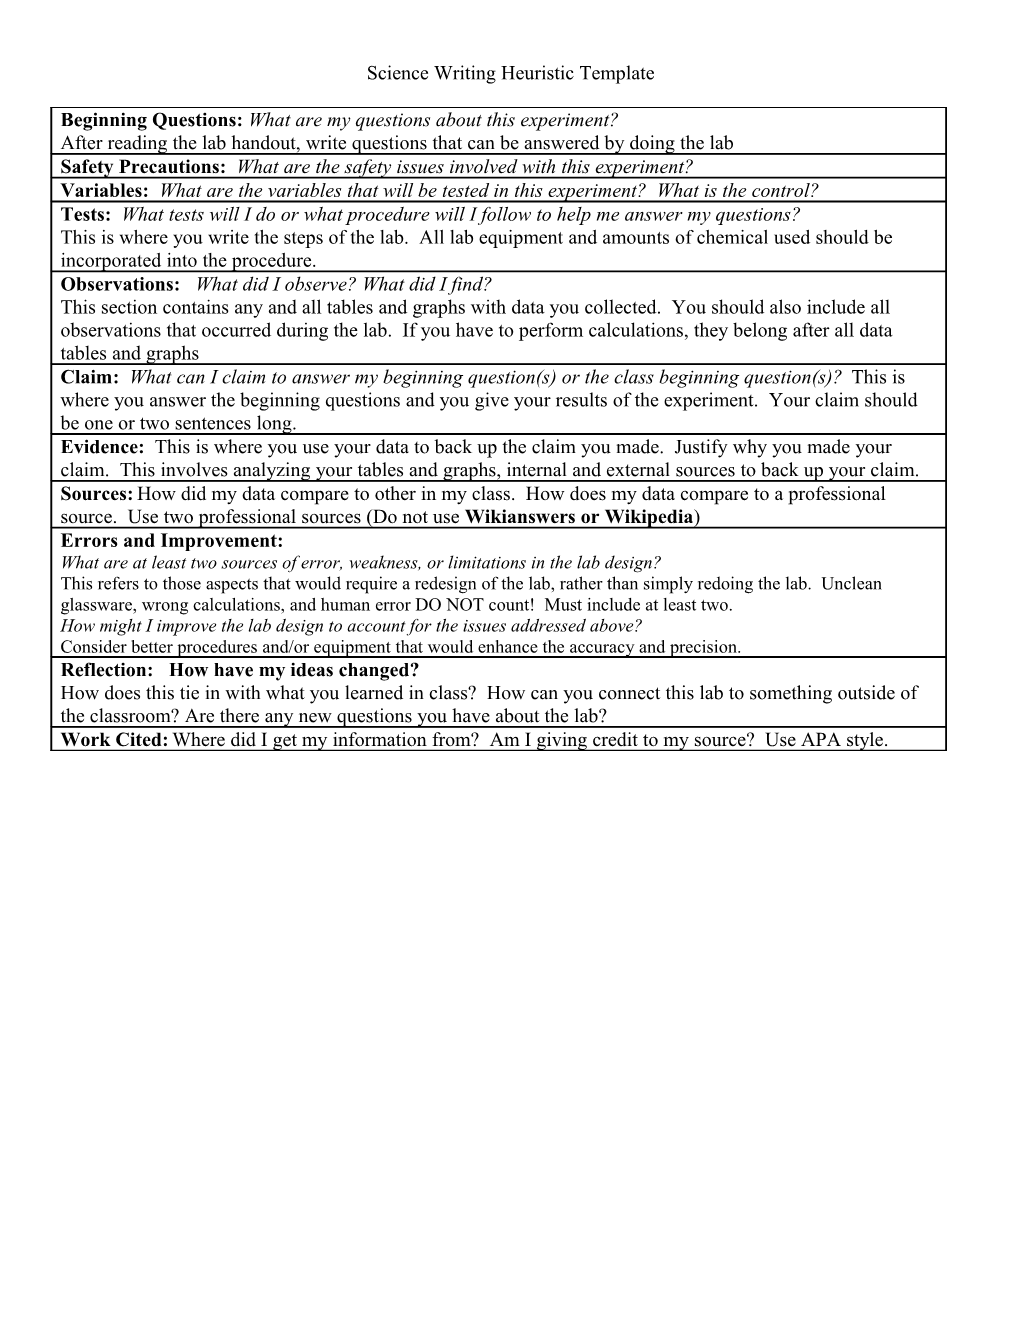 Science Writing Heuristic Template